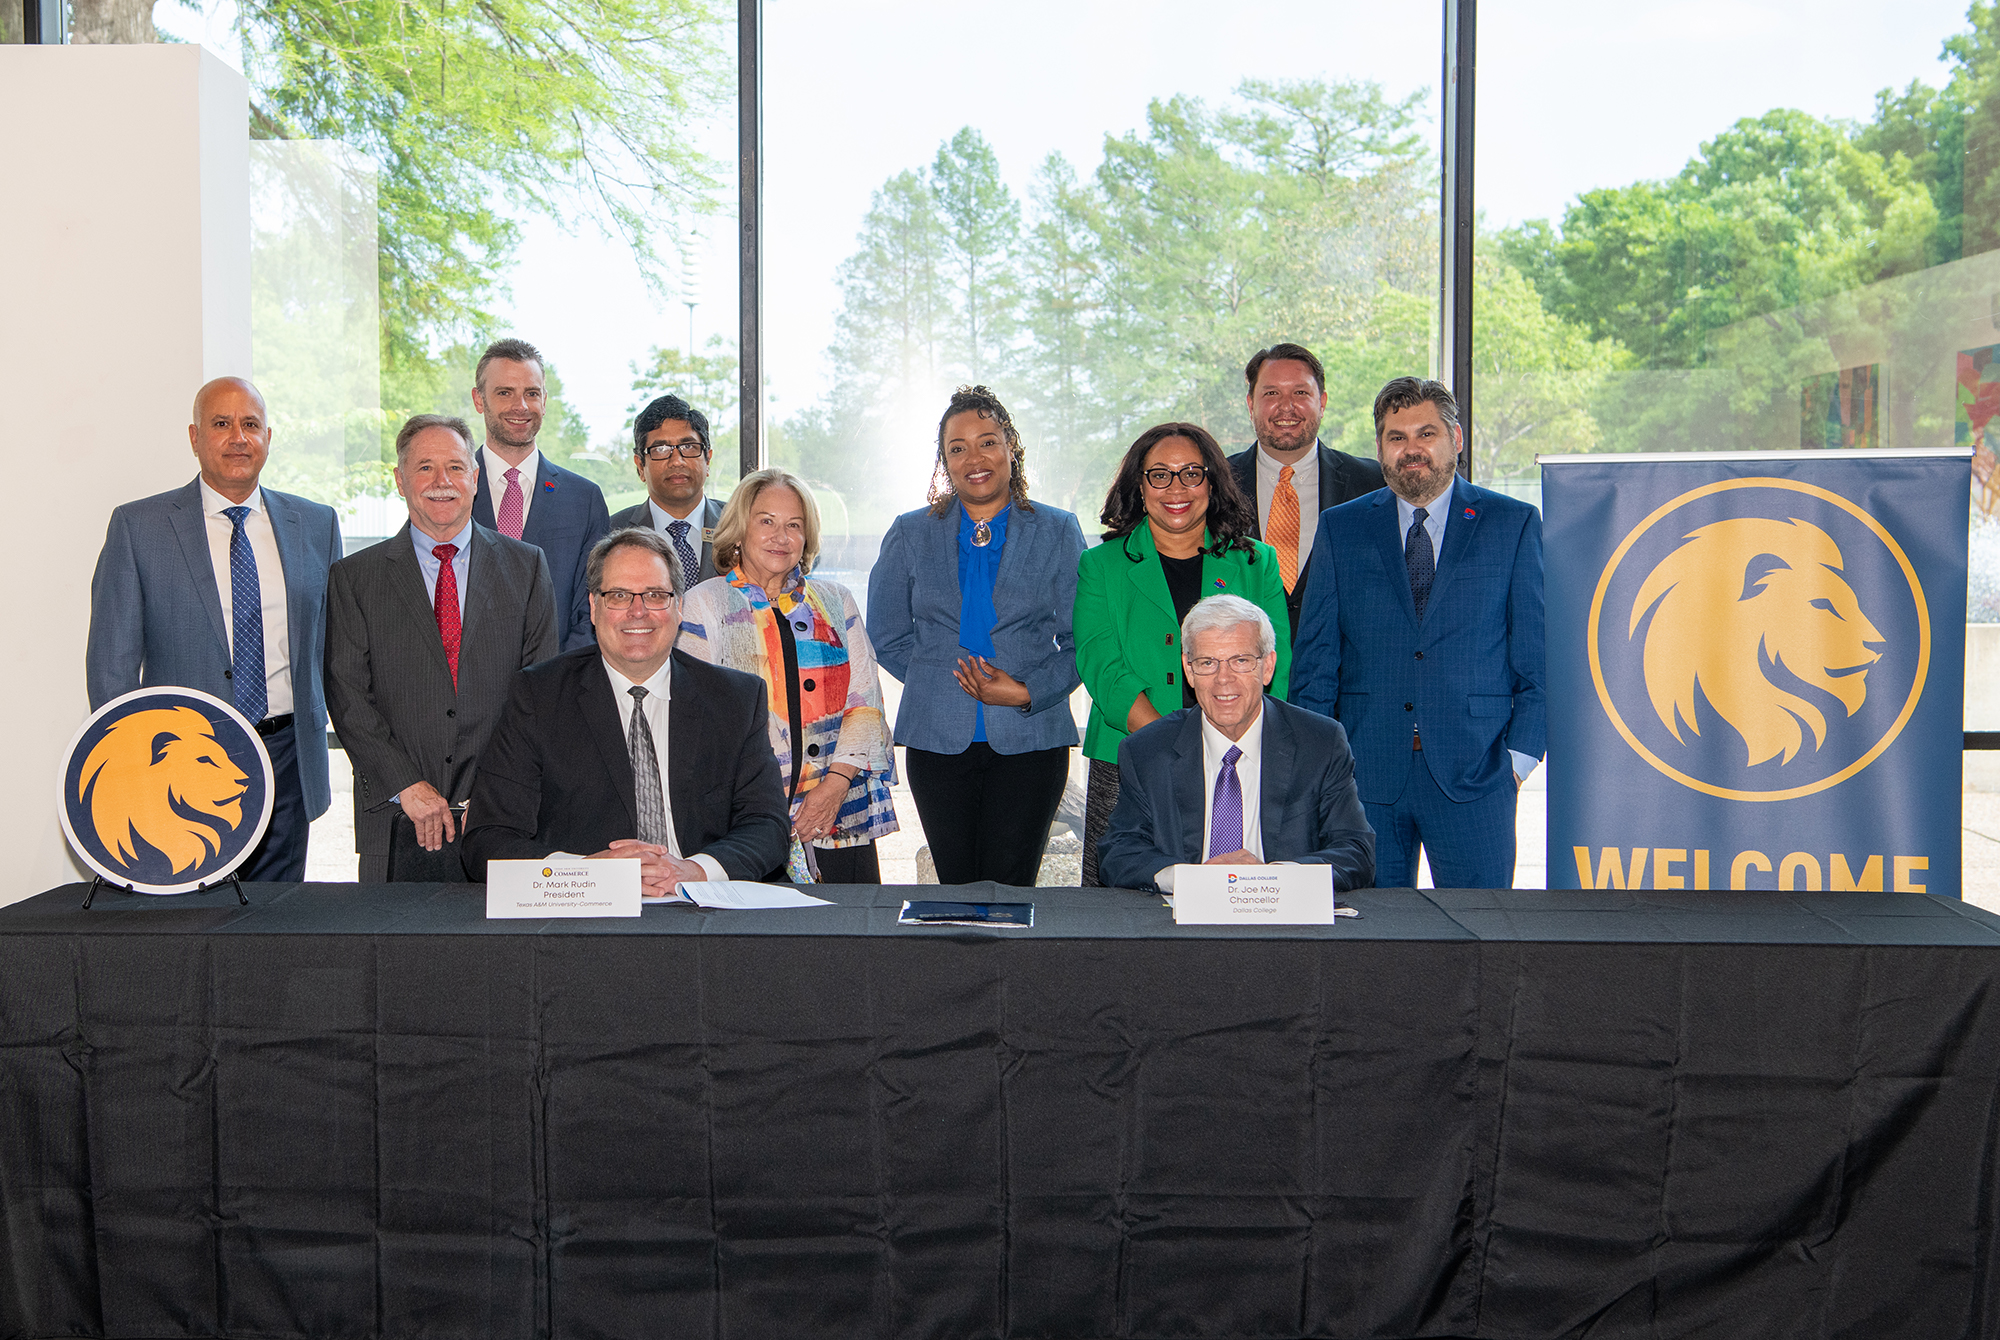 Officials with Texas A&M University-Commerce and Dallas College signed a memorandum of understanding on Tuesday, April 13 at the Dallas College Richland Campus to mark the beginning of a partnership to bring new undergraduate degree pathways to Dallas students.